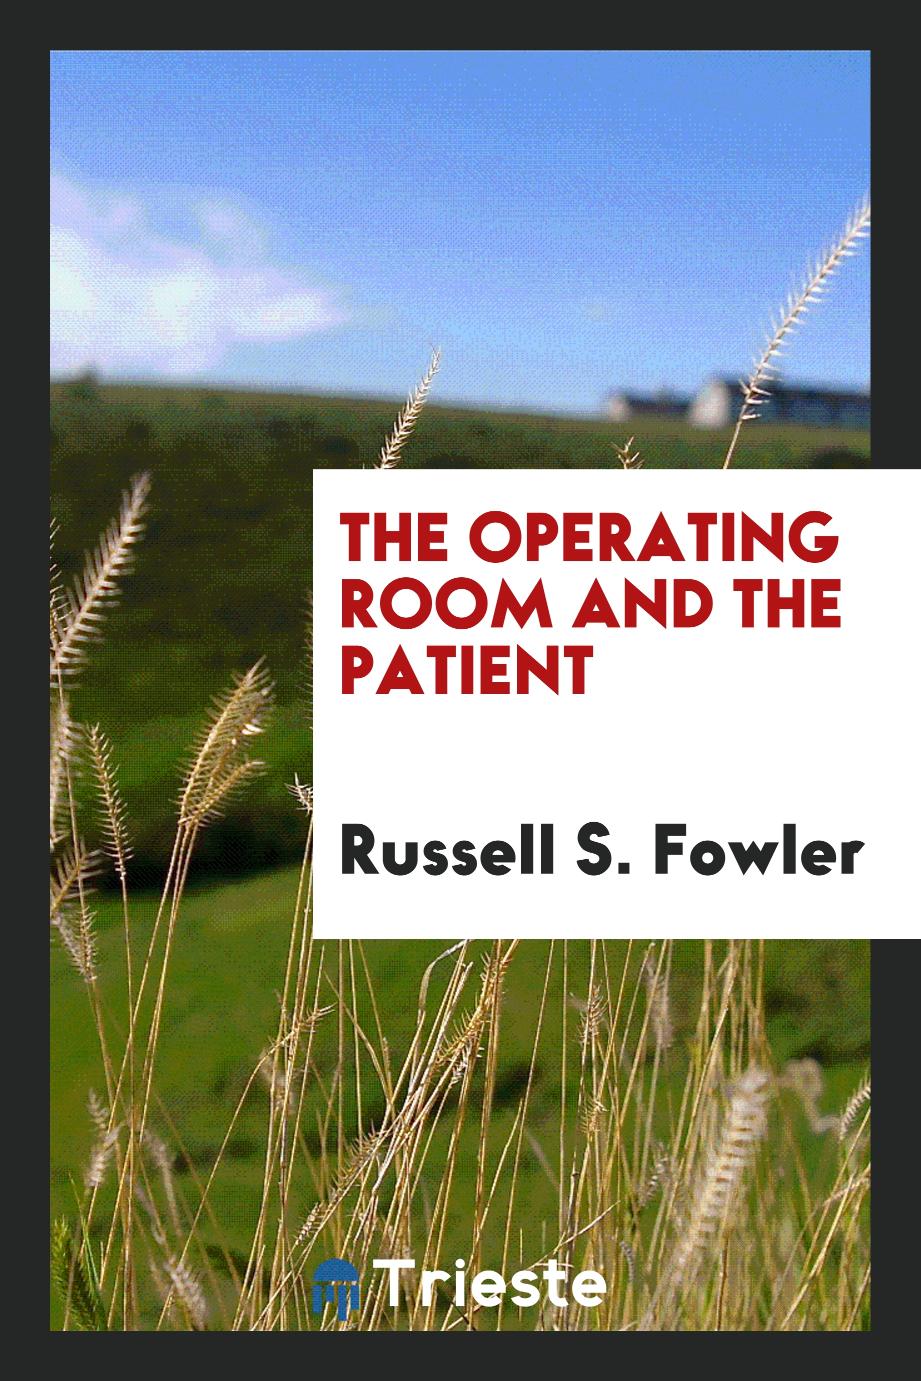 The Operating Room and the Patient